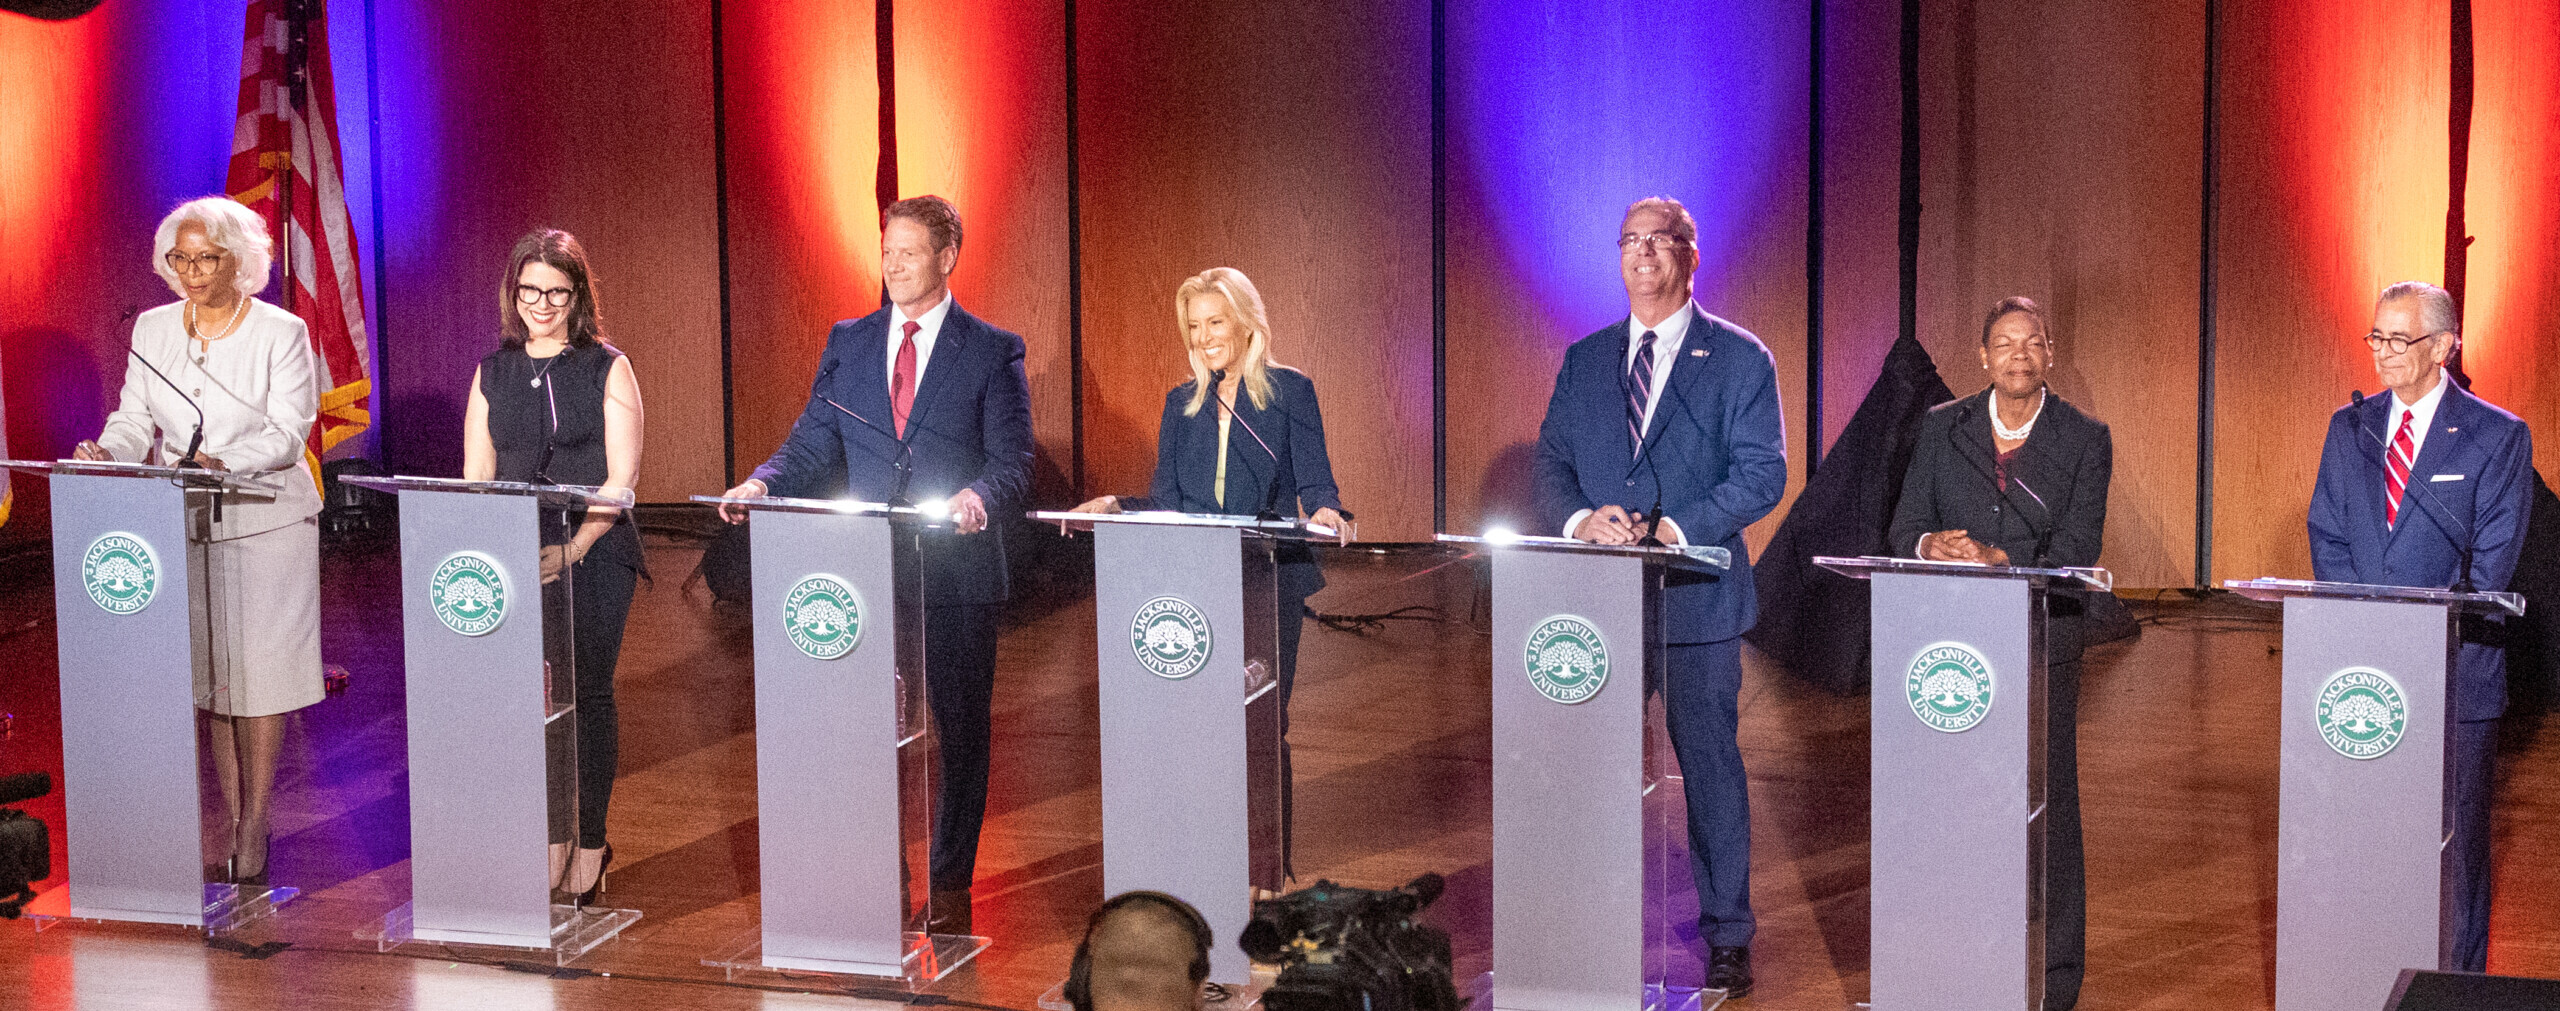 Featured image for “3 takeaways from the Jacksonville mayoral debate”